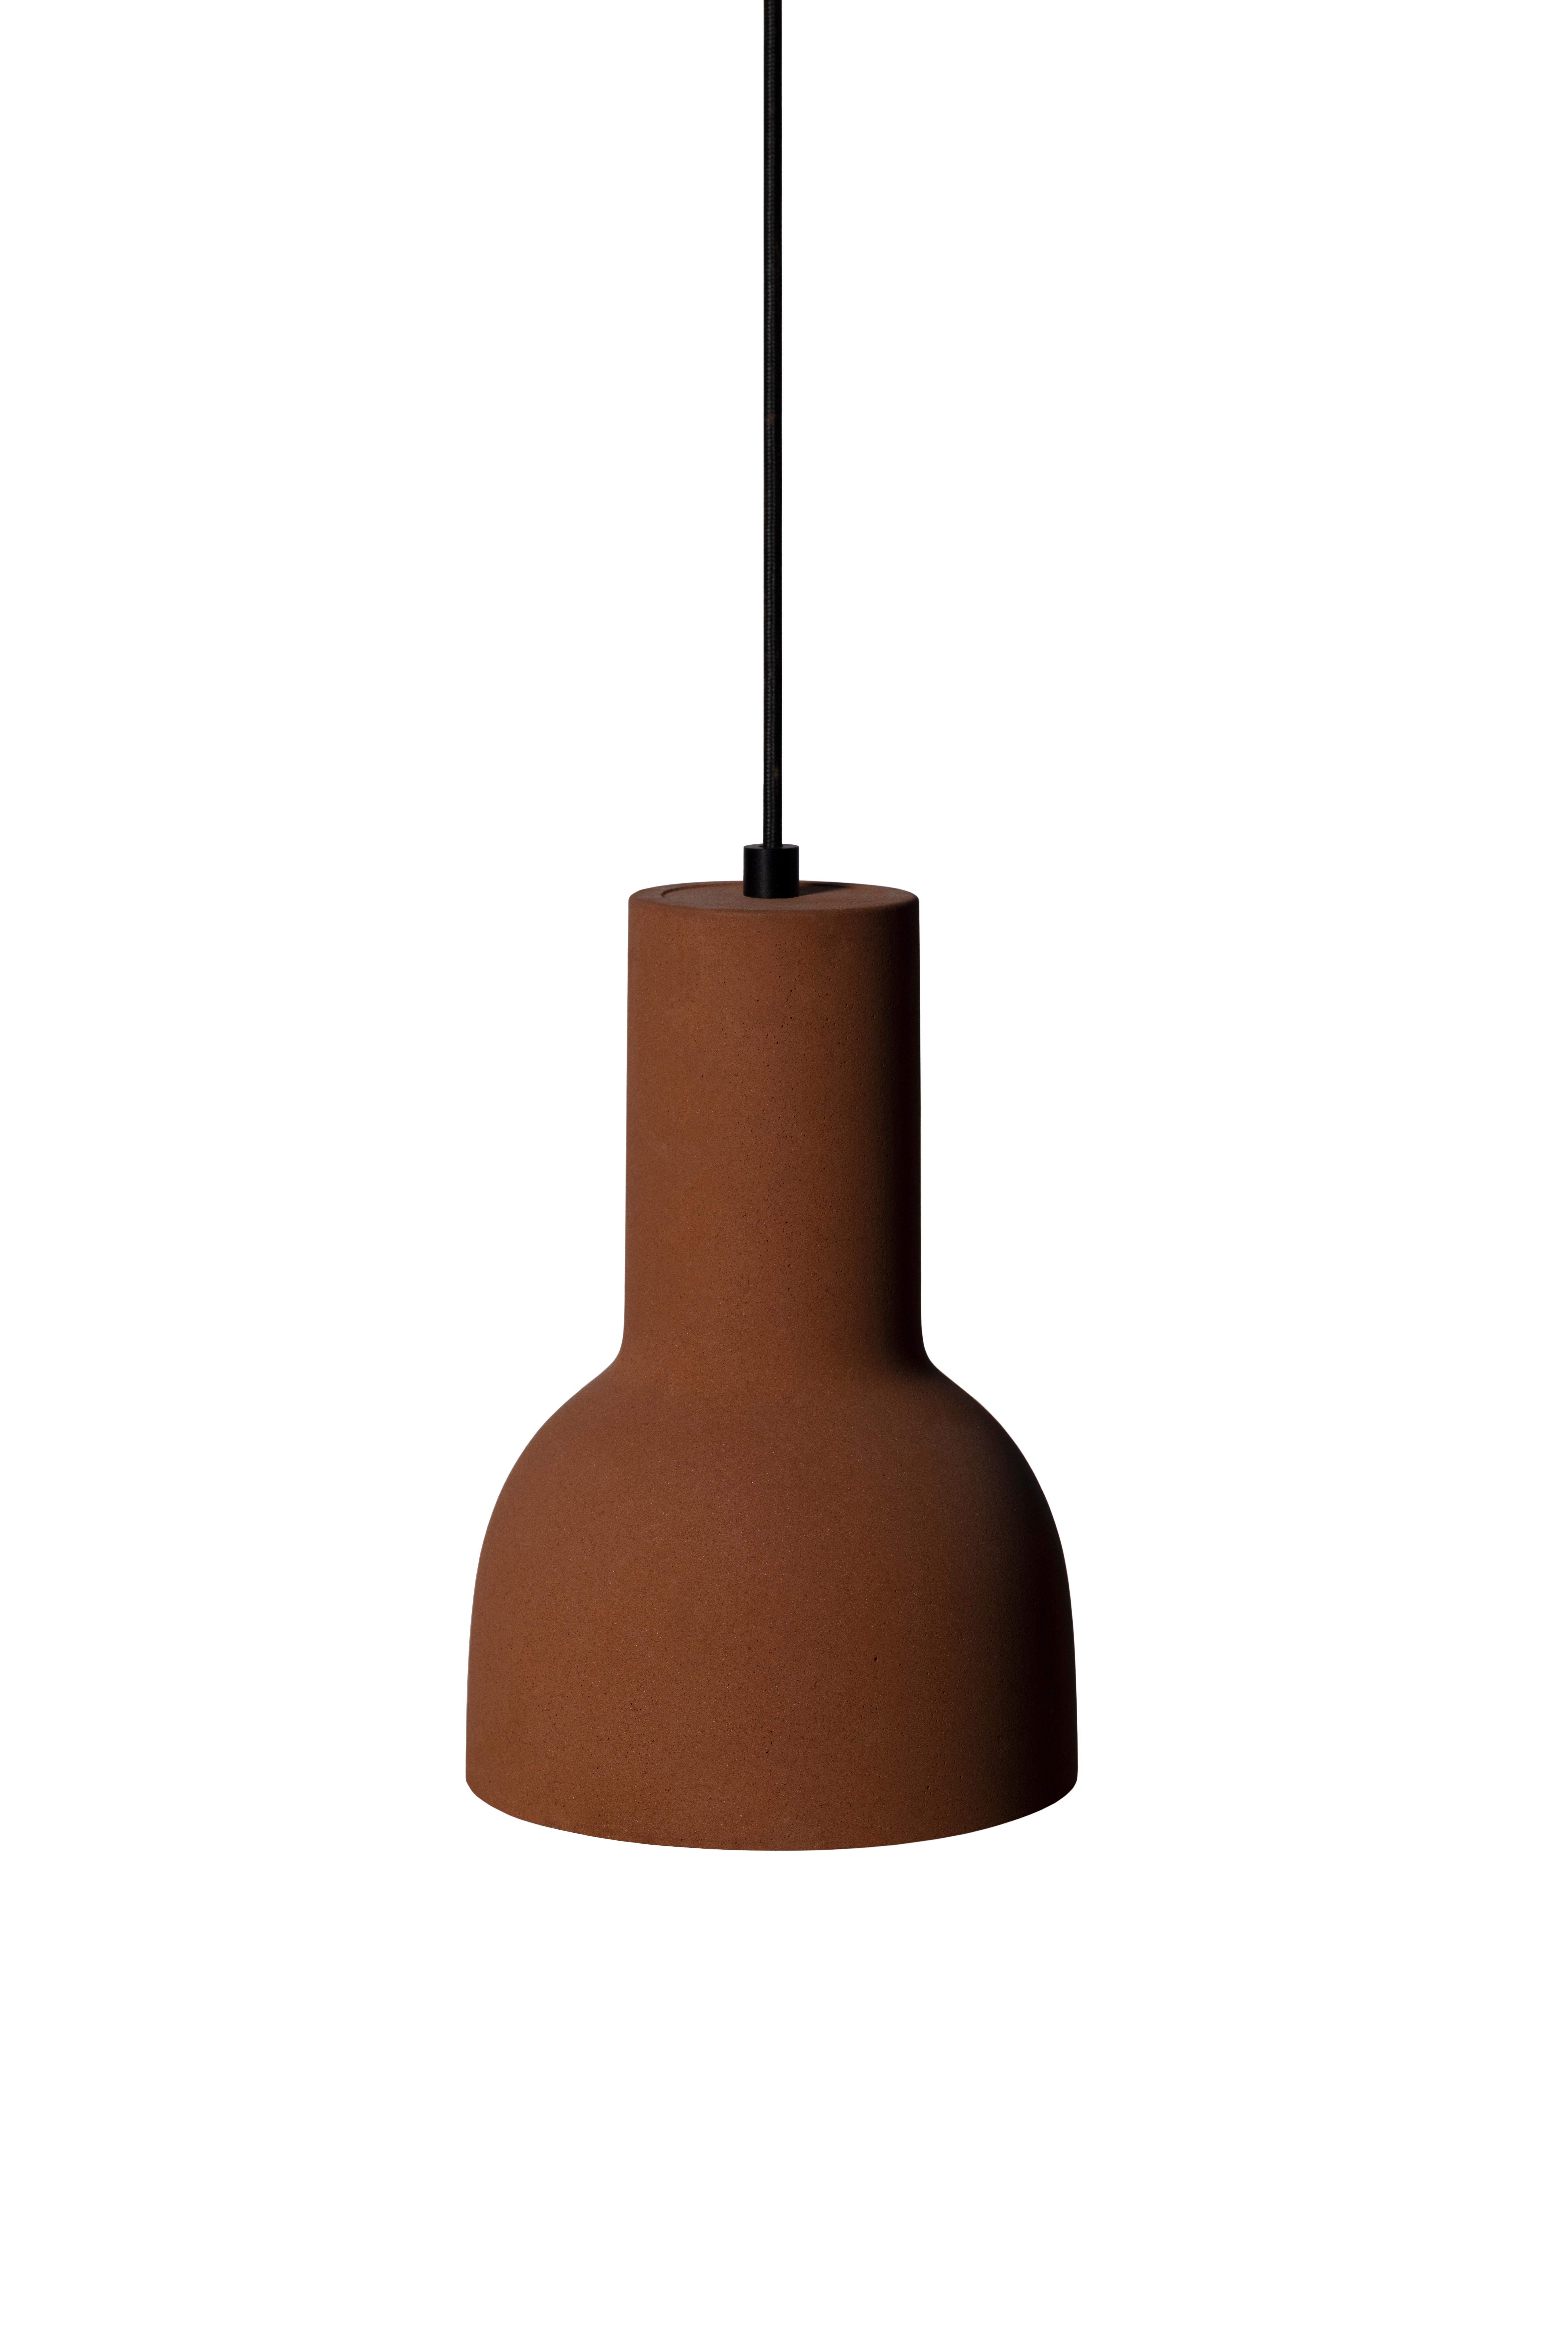 Pendant lamp 'Echo' by Nongzao x Bentu Design.
Material: Terracotta 
Color: Earthy orange 

Measures: 30 cm high, 20 cm diameter
Wire: 3 meters (black)
Lamp type: AC 100-240V 50-60Hz  9W - Comptable with US electric system.

Variations:
- Color: